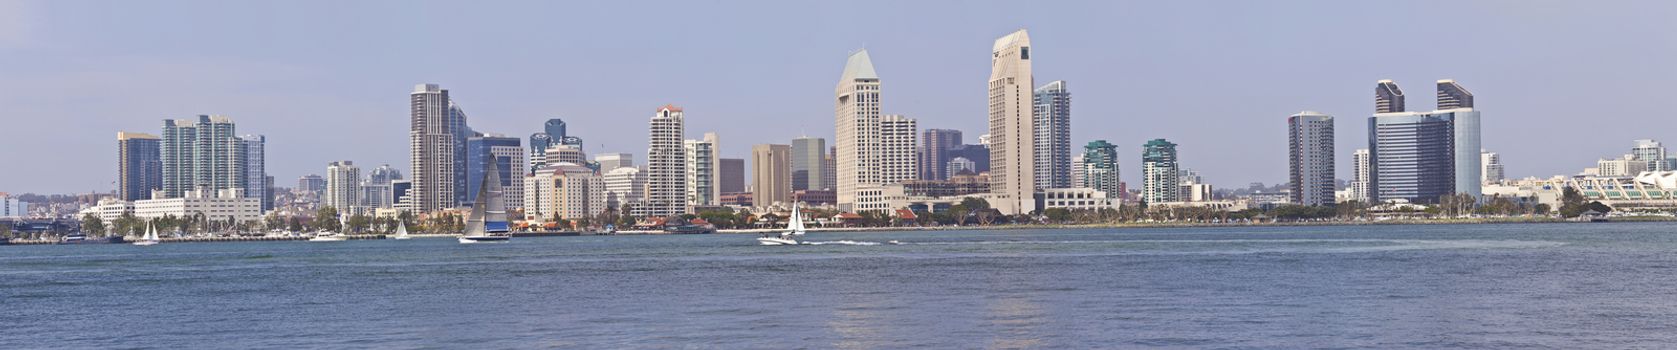 The San Diego skyline panorama and activities on the waterfront southern California.